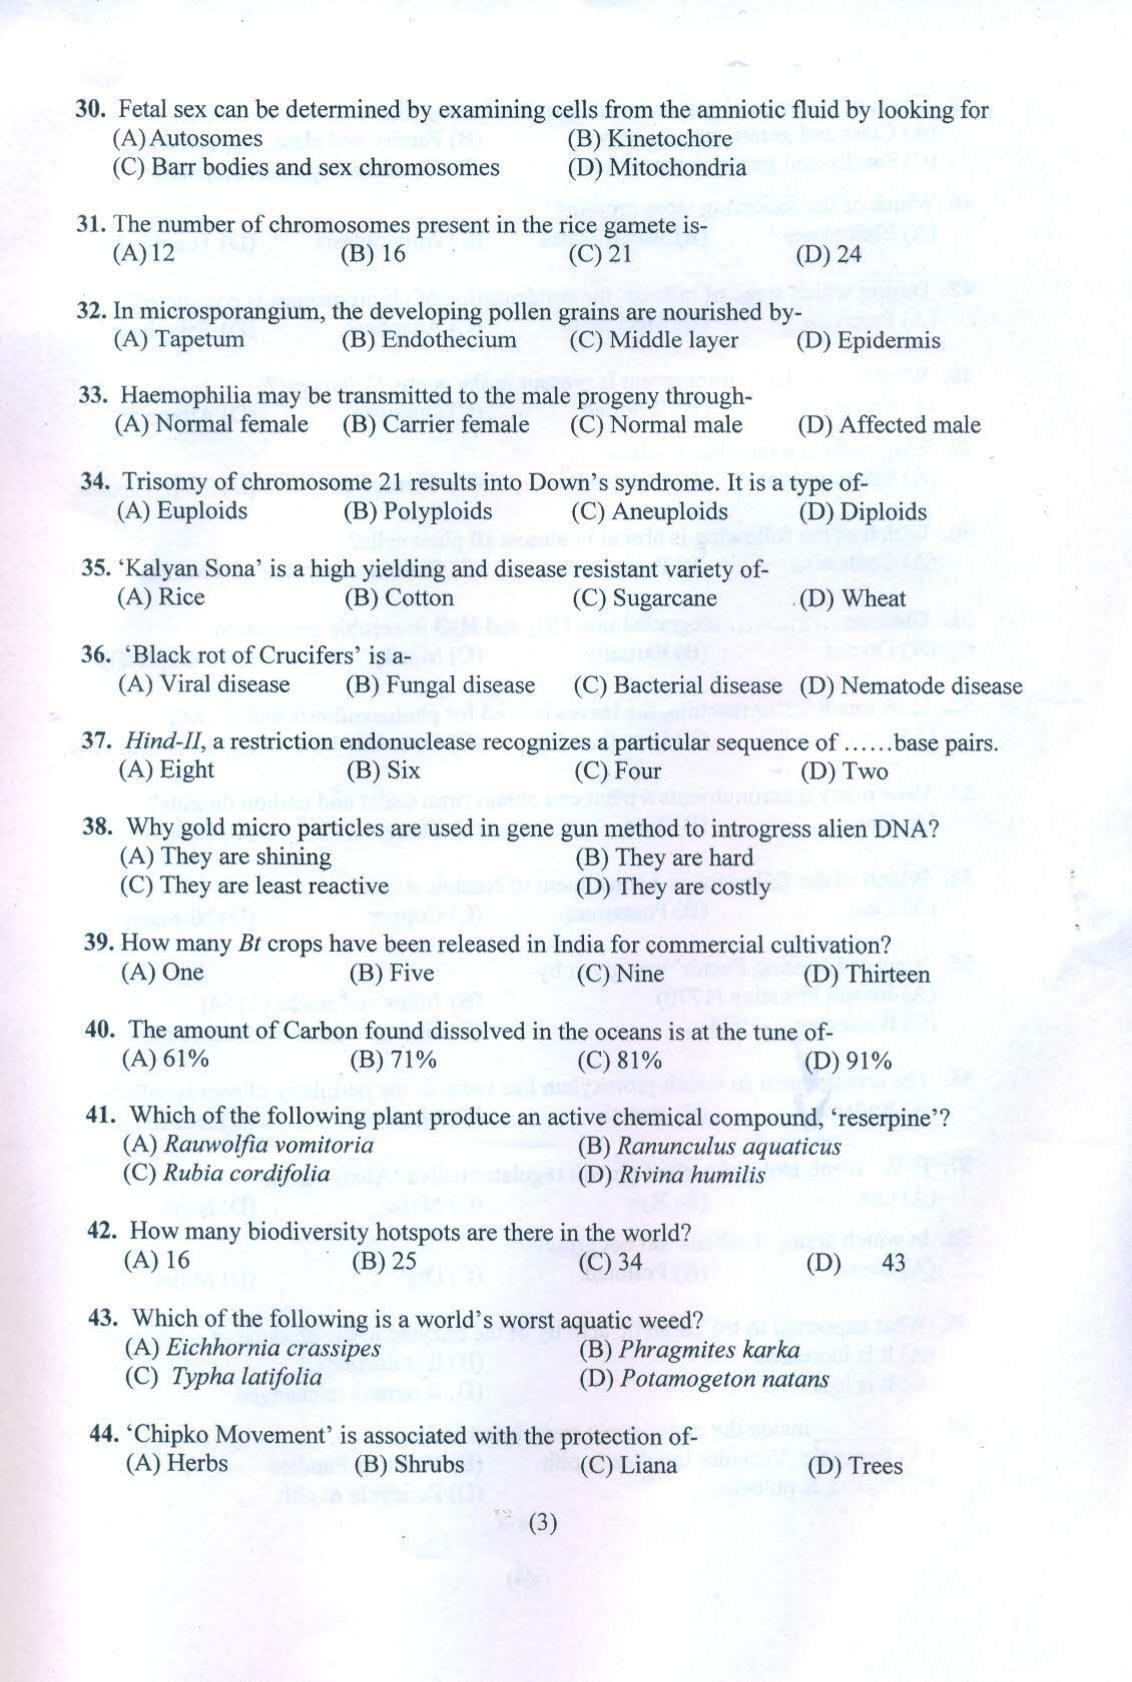 PUCET UG 2021 Biology Question Paper - Page 4